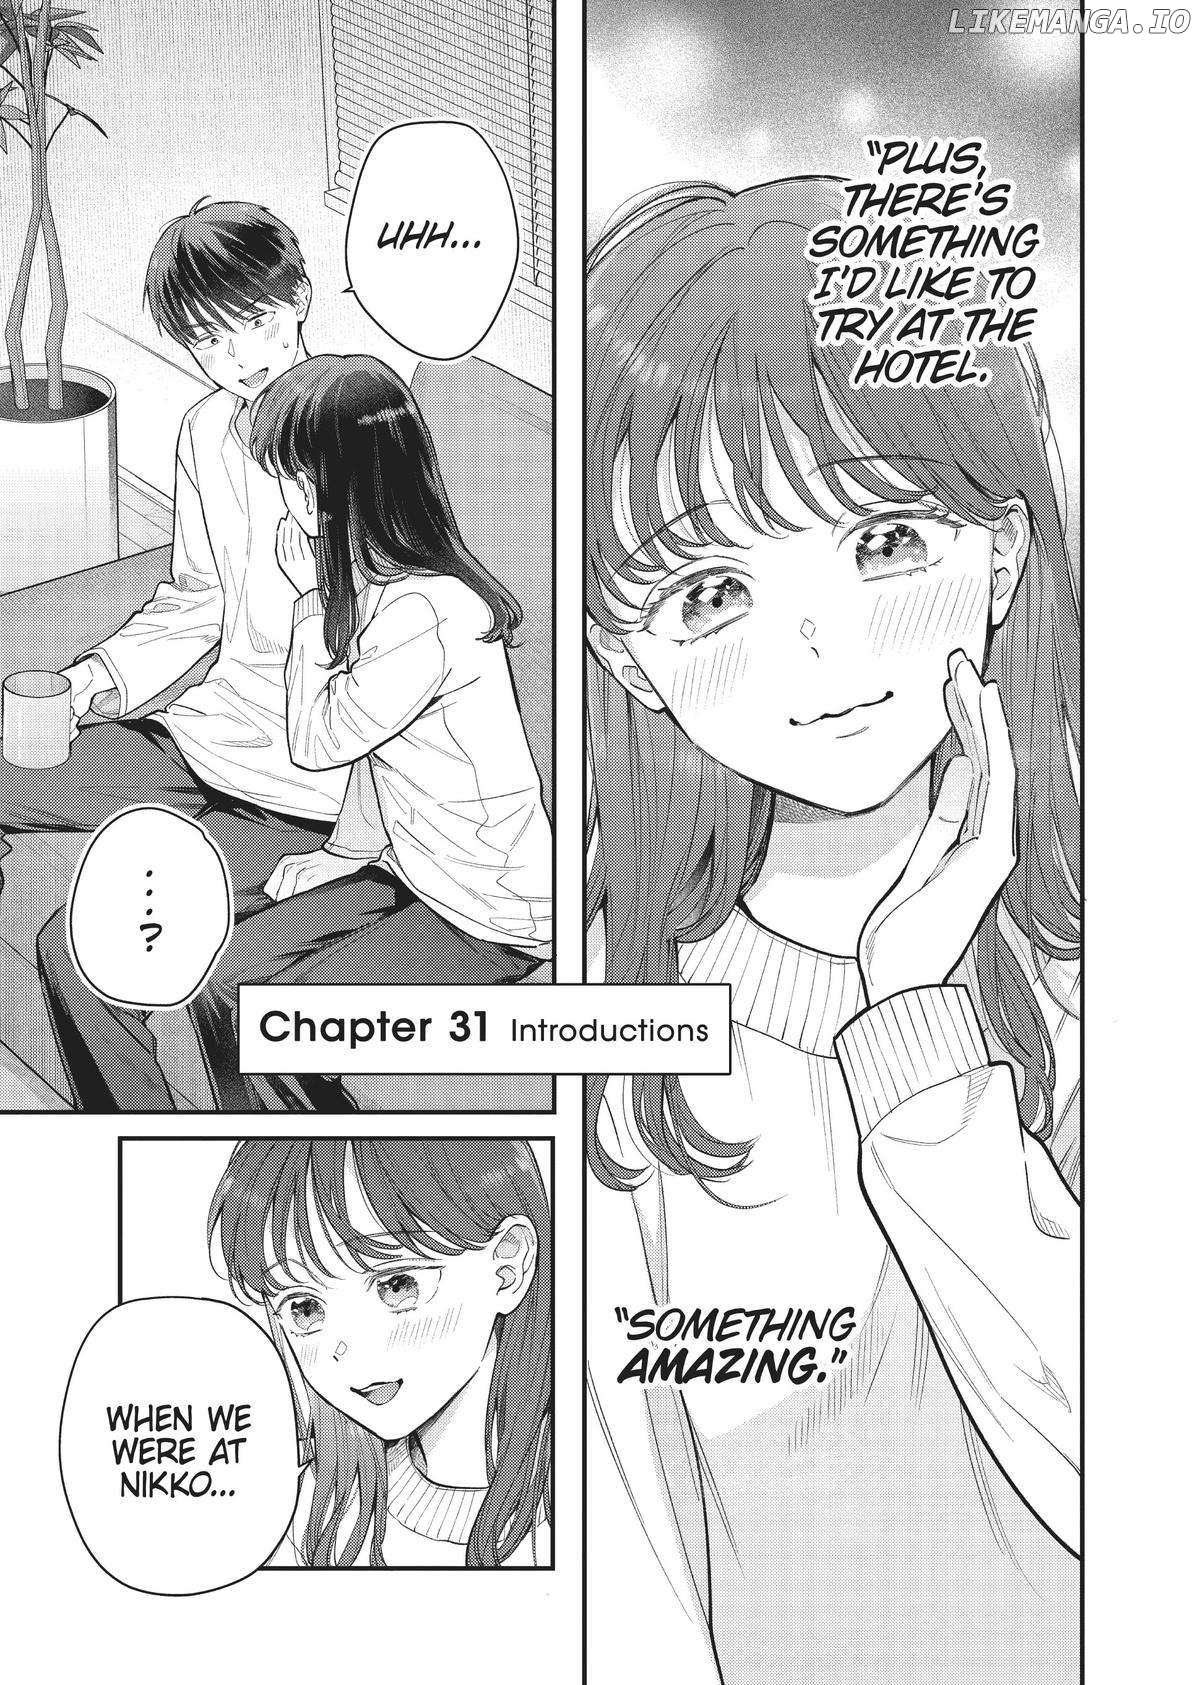 Is It Wrong To Get Done By A Girl? - Page 1